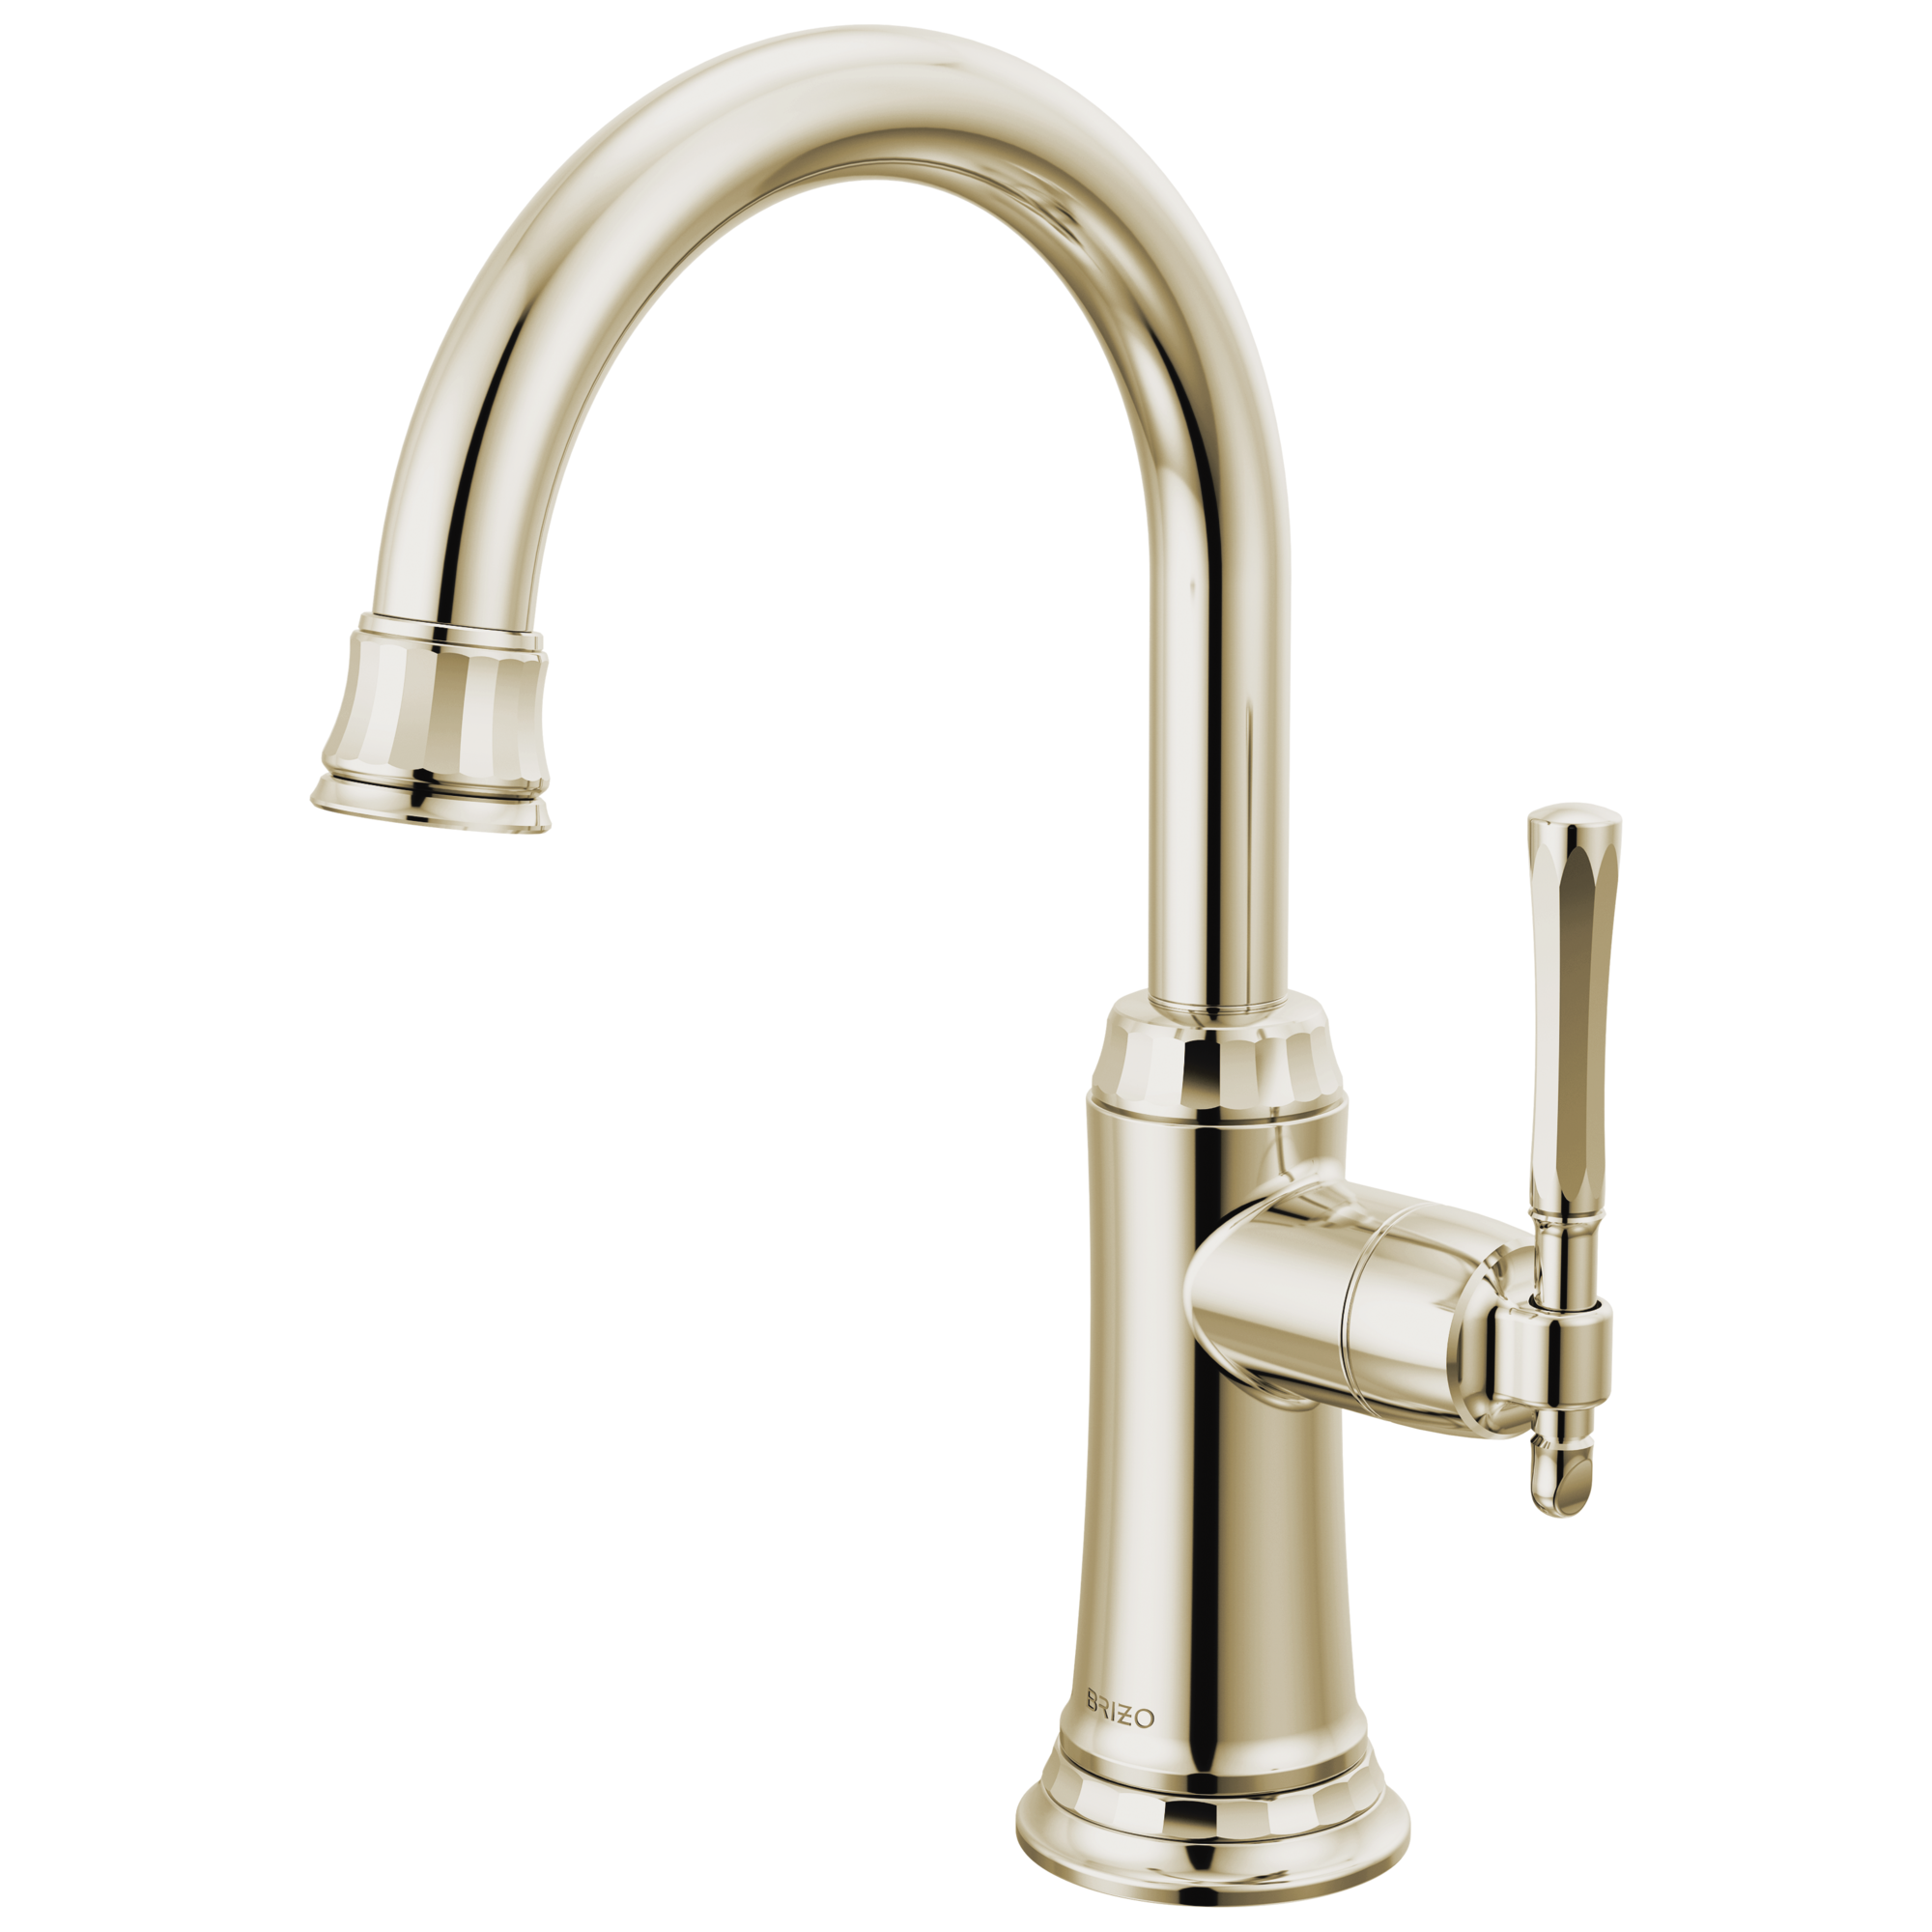 Brizo The Tulham Kitchen Collection by Brizo Beverage Faucet